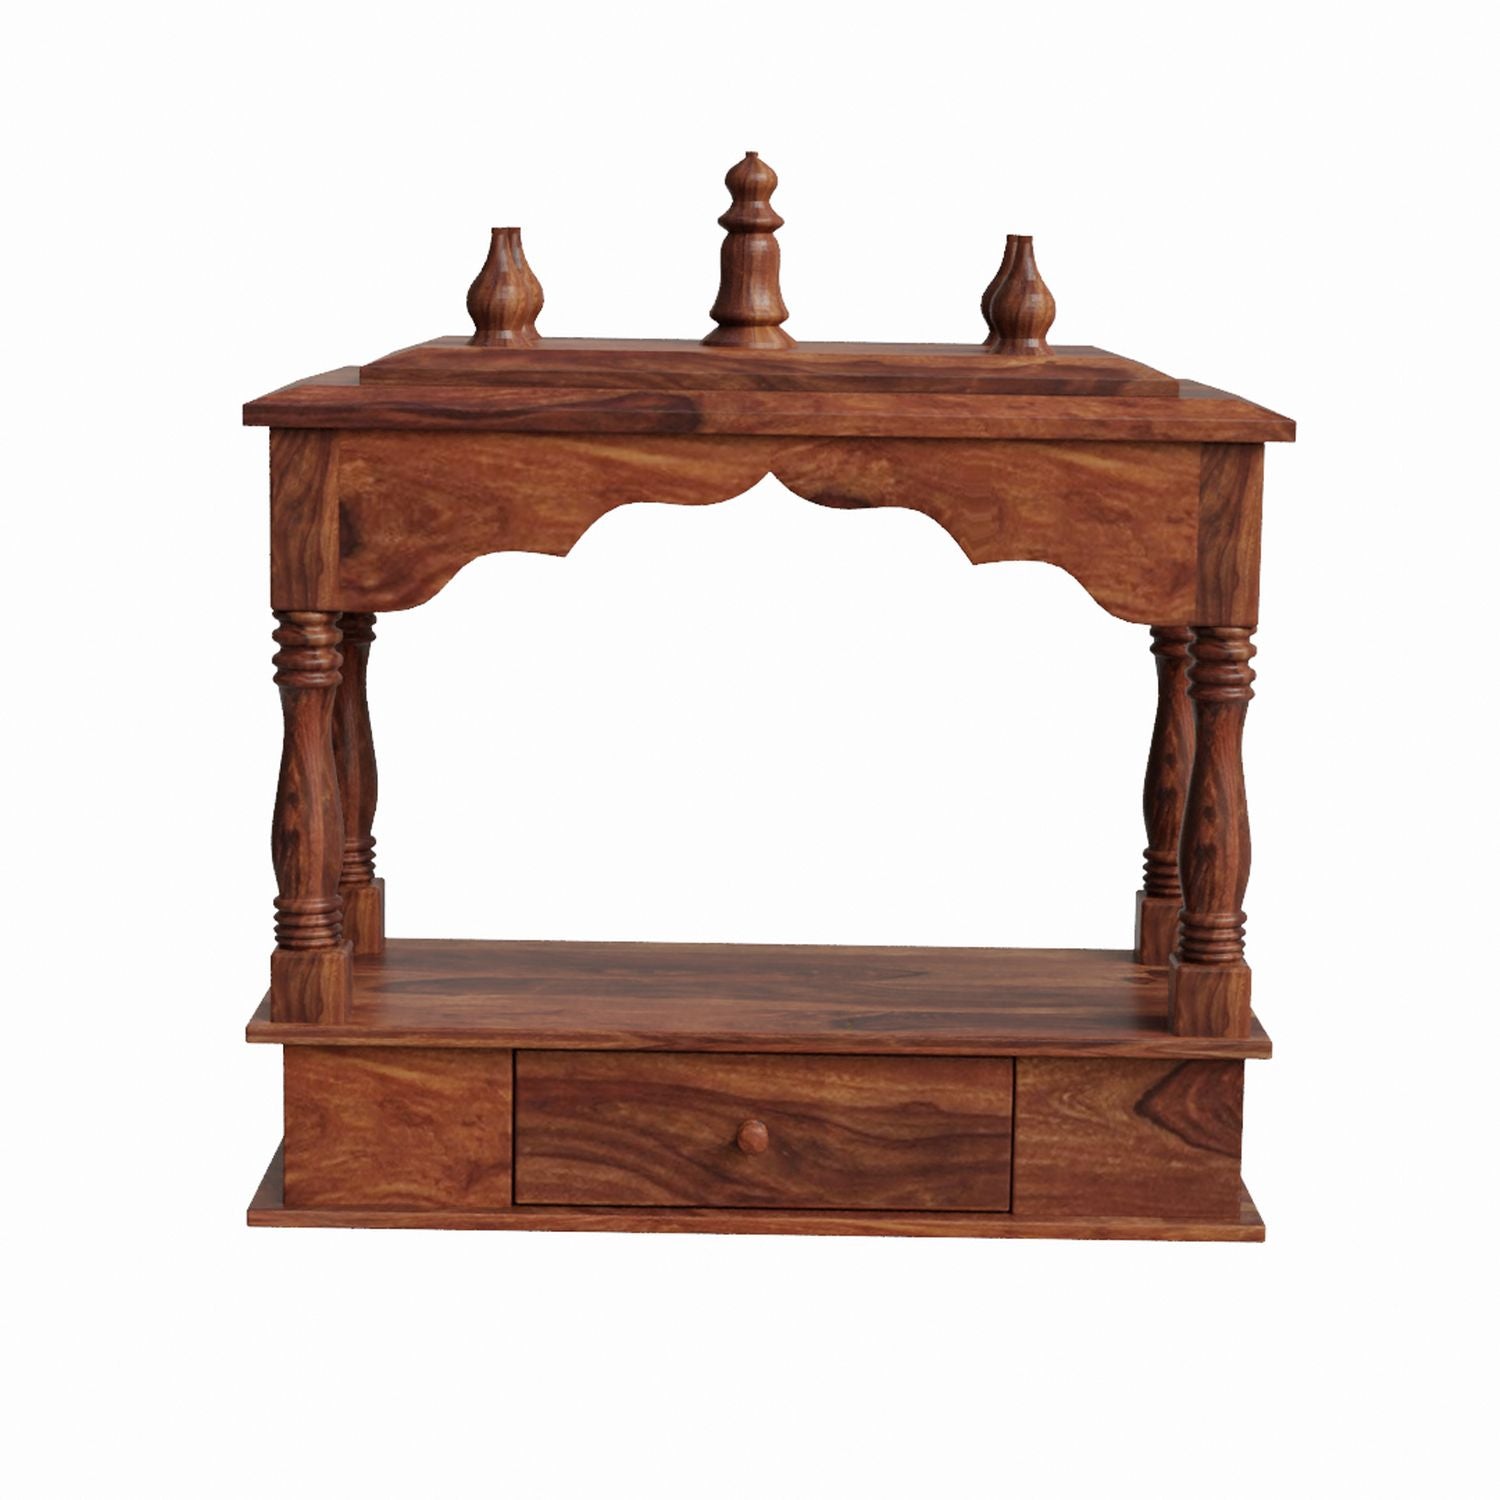 Pray2god Solid Sheesham Wood Temple for Home (Natural Finish)